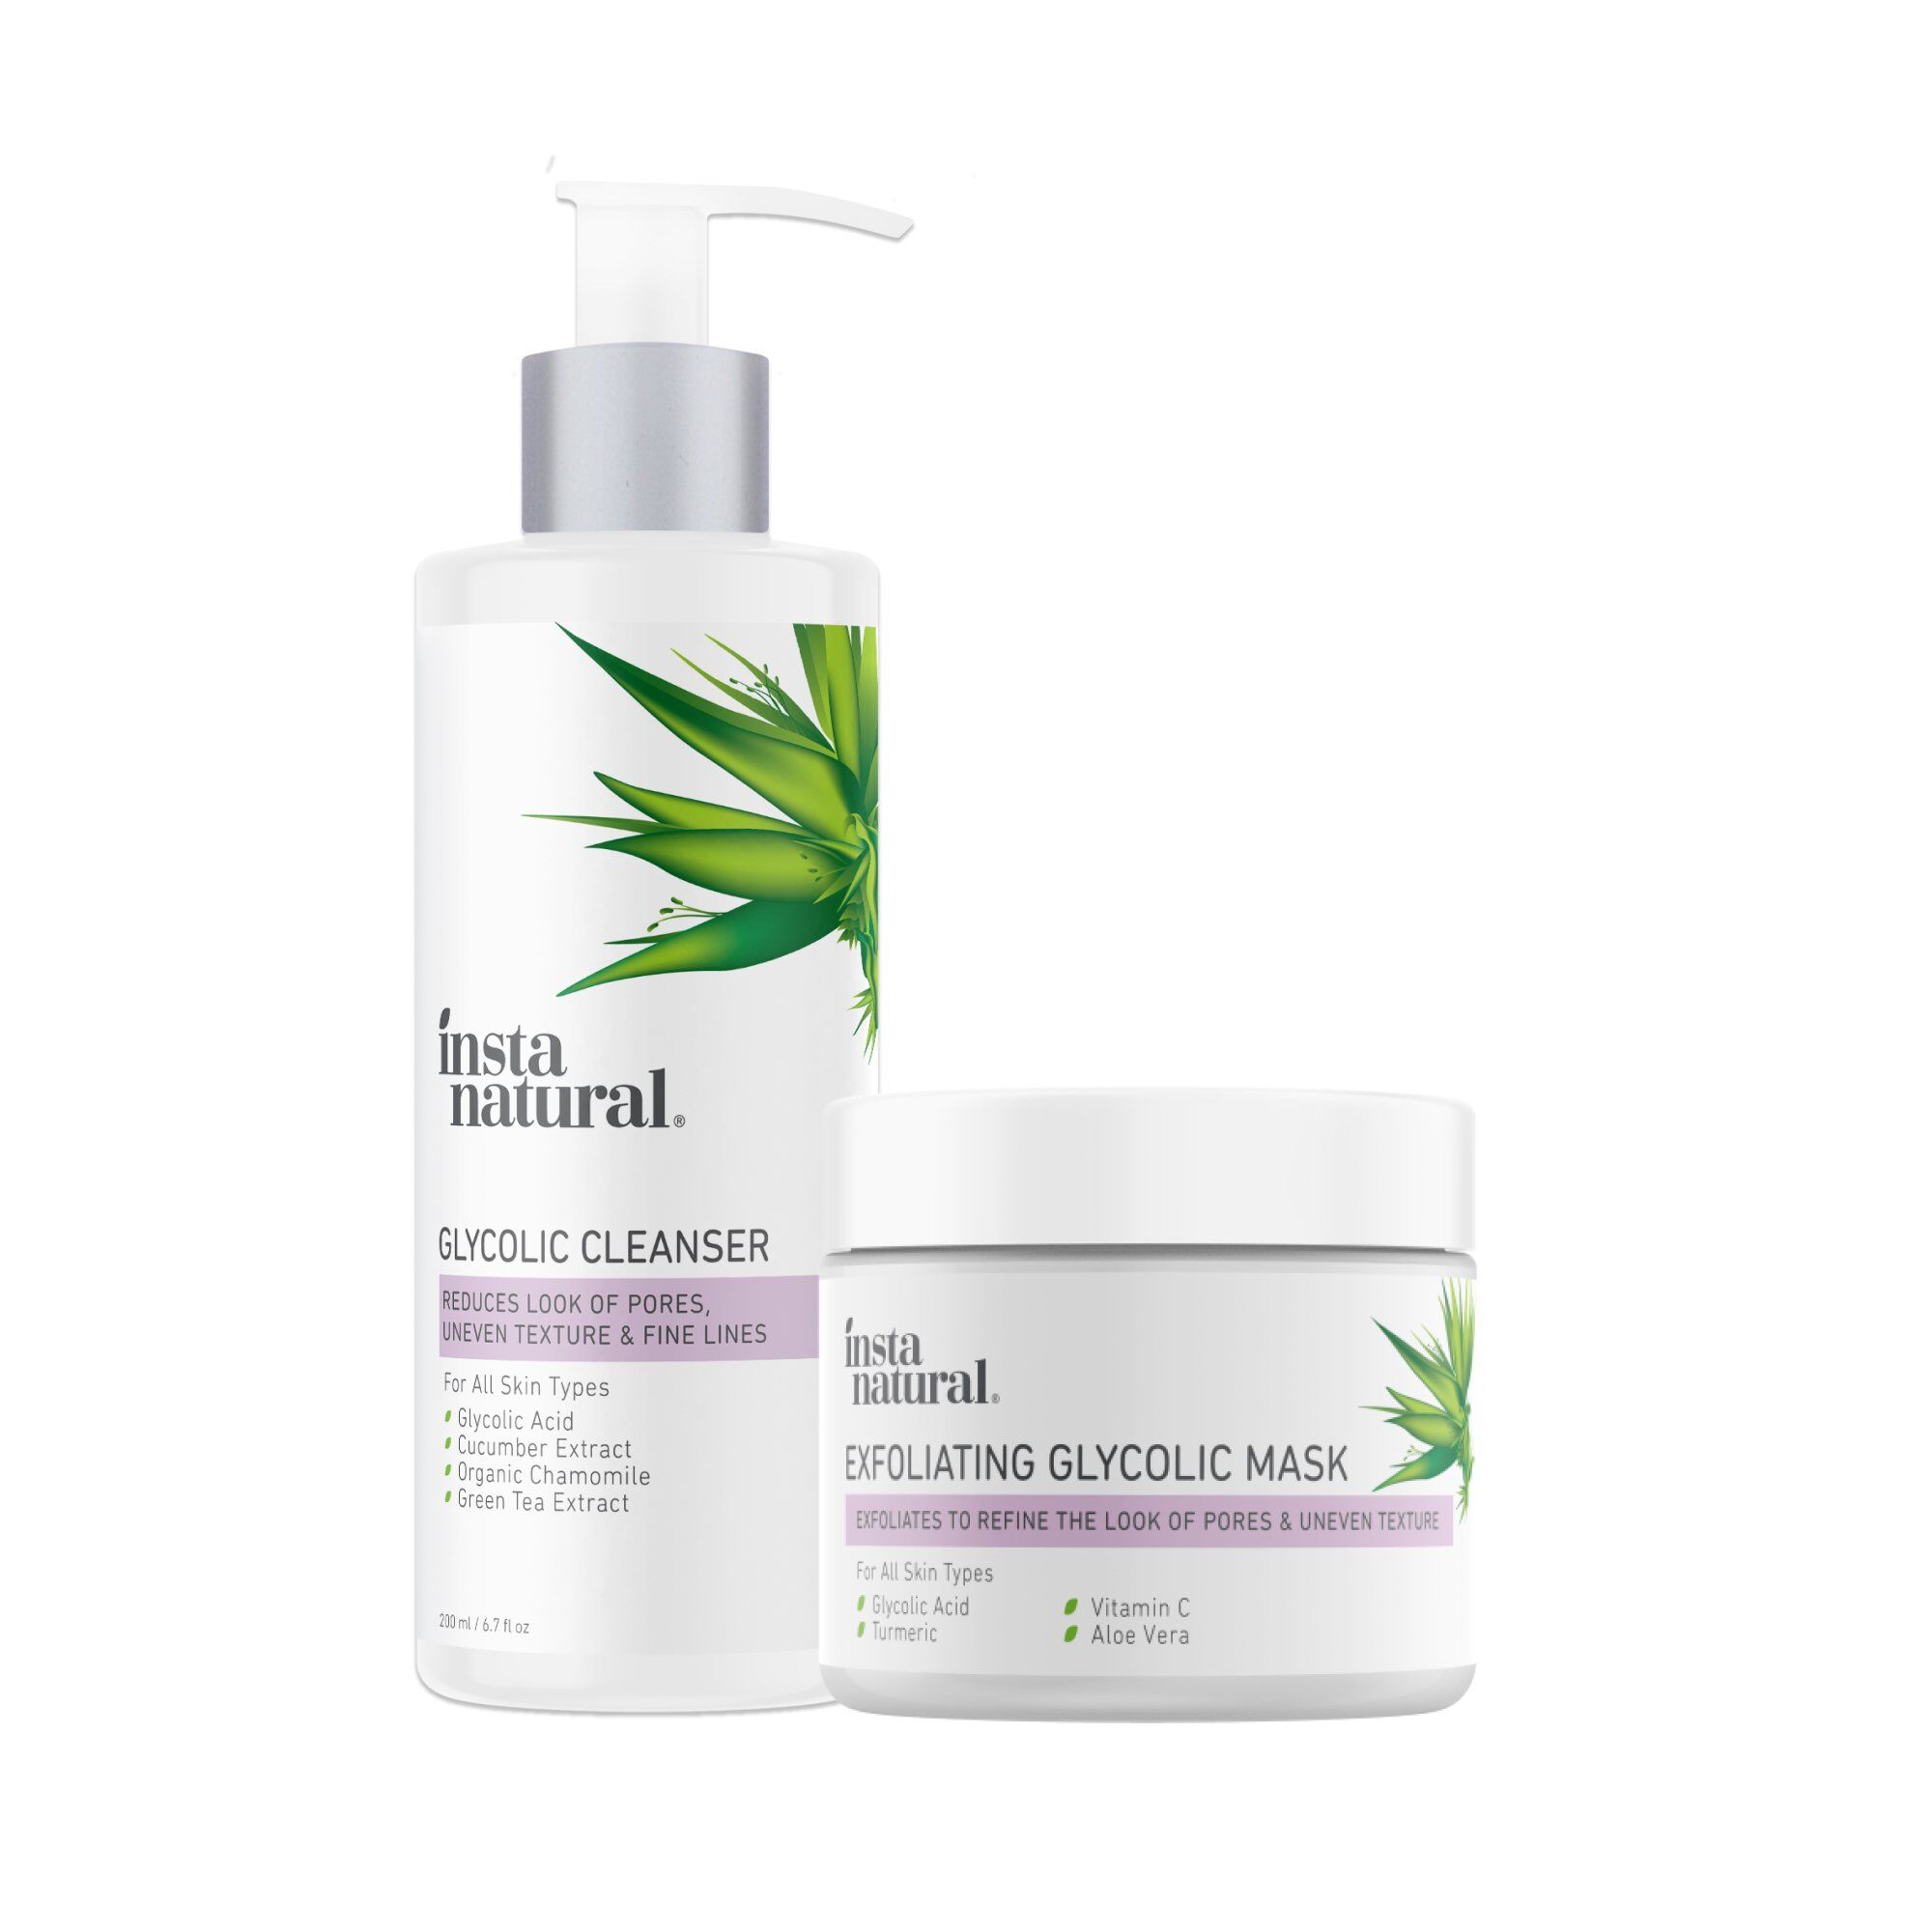 InstaNatural - Glycolic Cleanser & Exfoliating Glycolic Mask Duo